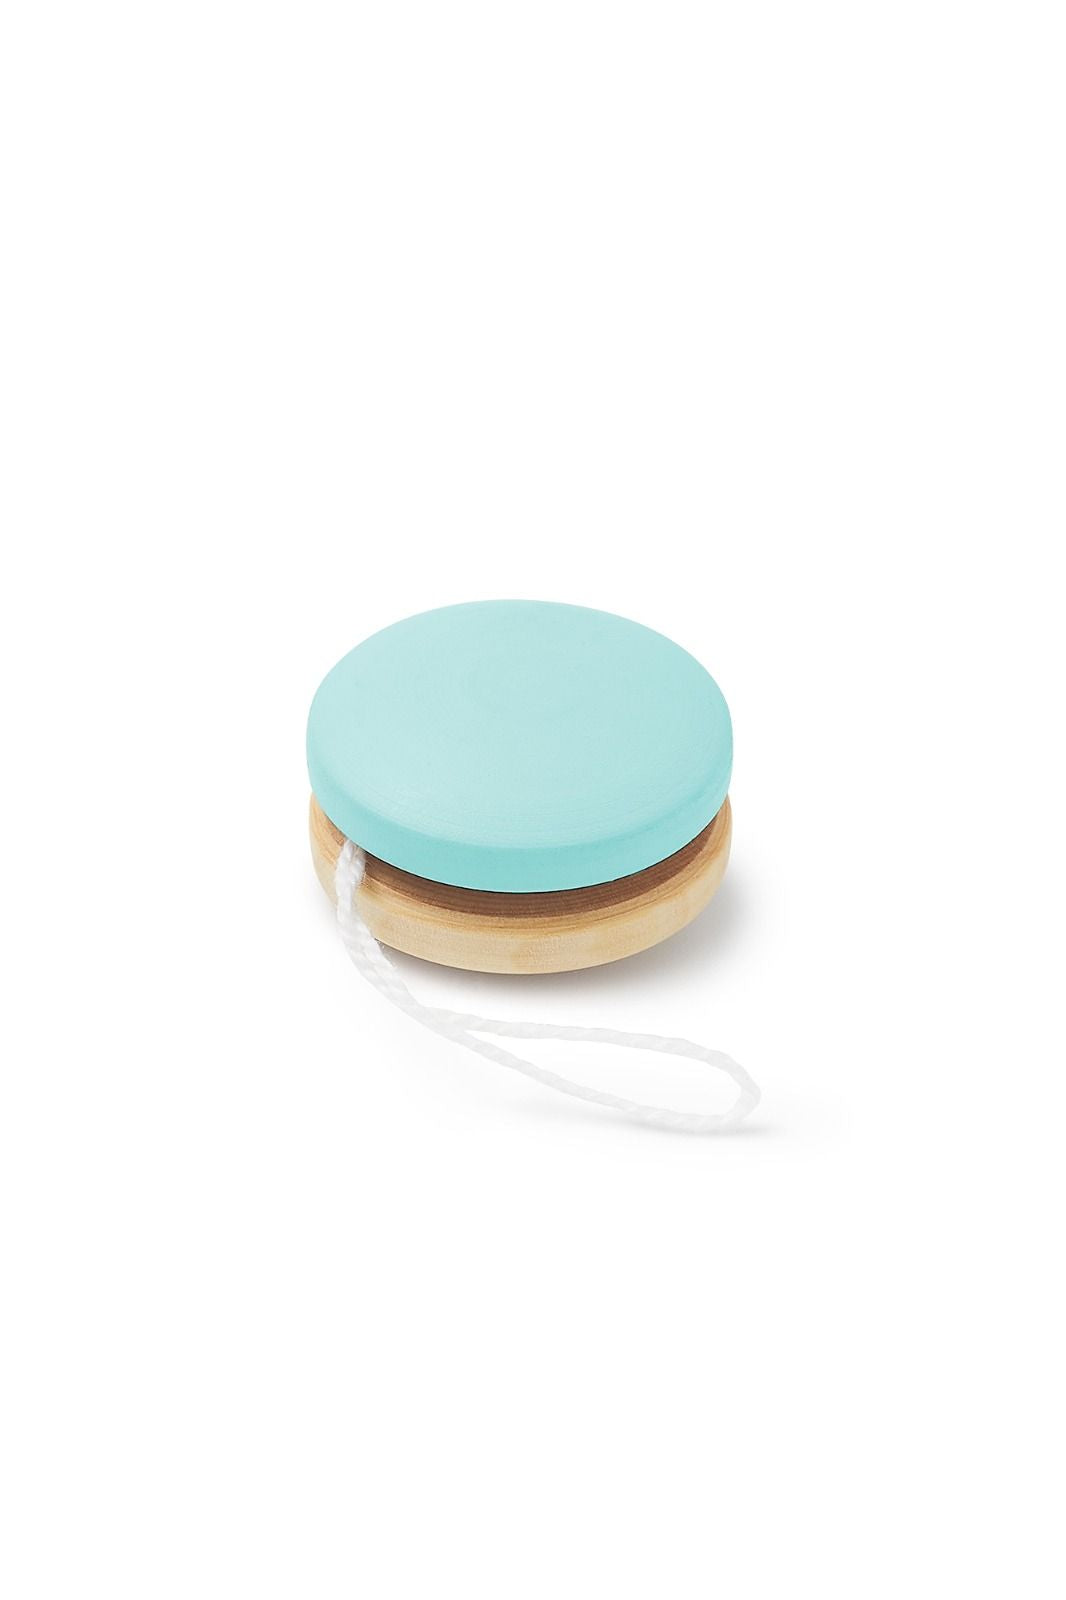 Mini Wooden YoYo - Eco-friendly and entertaining toy for sustainable and nostalgic play.